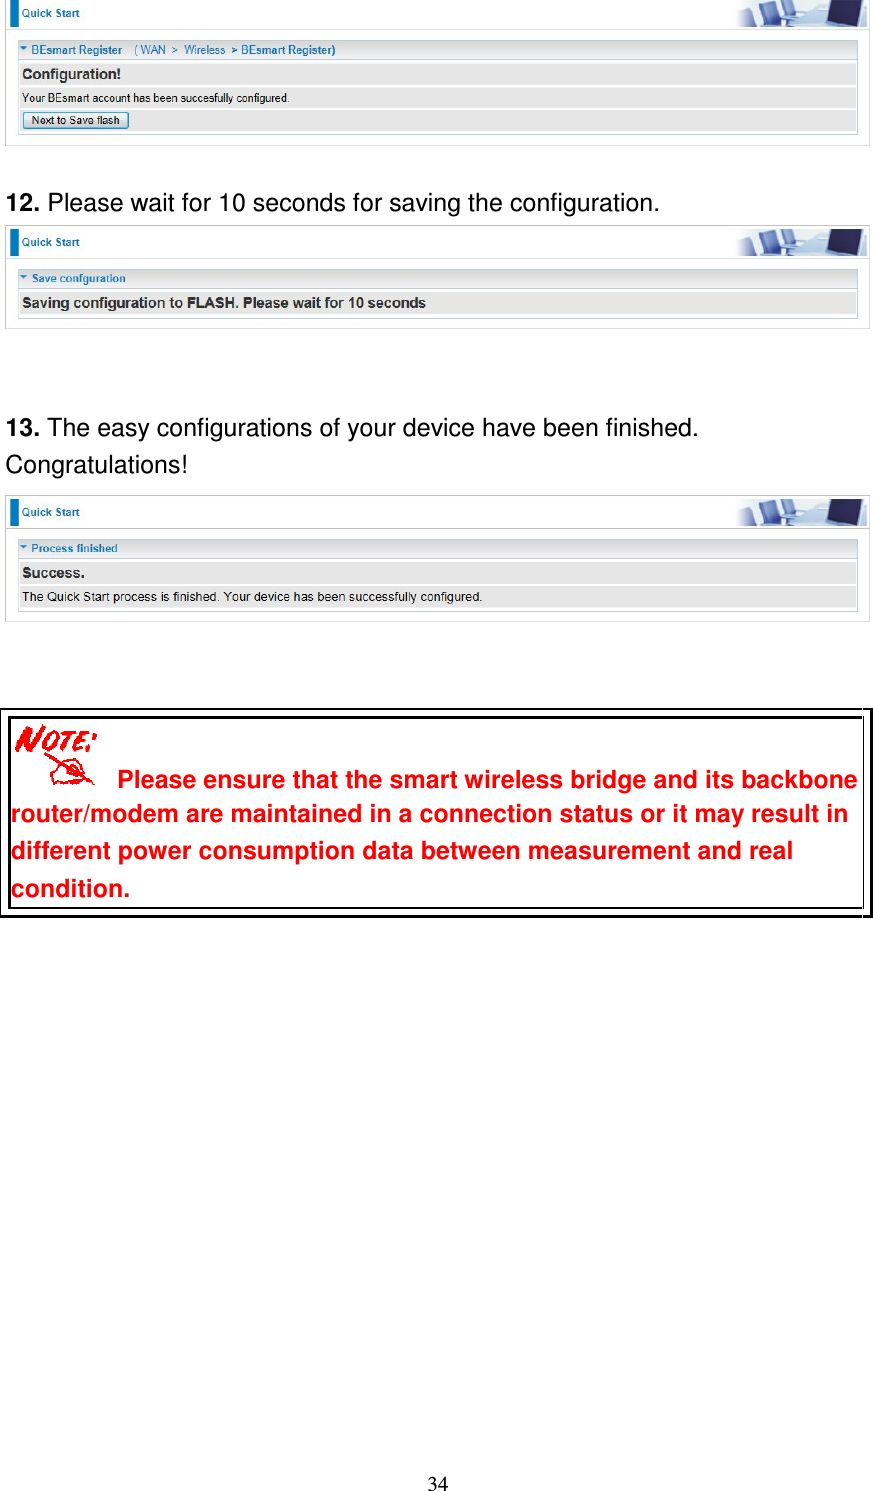   34  12. Please wait for 10 seconds for saving the configuration.      13. The easy configurations of your device have been finished. Congratulations!        Please ensure that the smart wireless bridge and its backbone router/modem are maintained in a connection status or it may result in different power consumption data between measurement and real condition.               